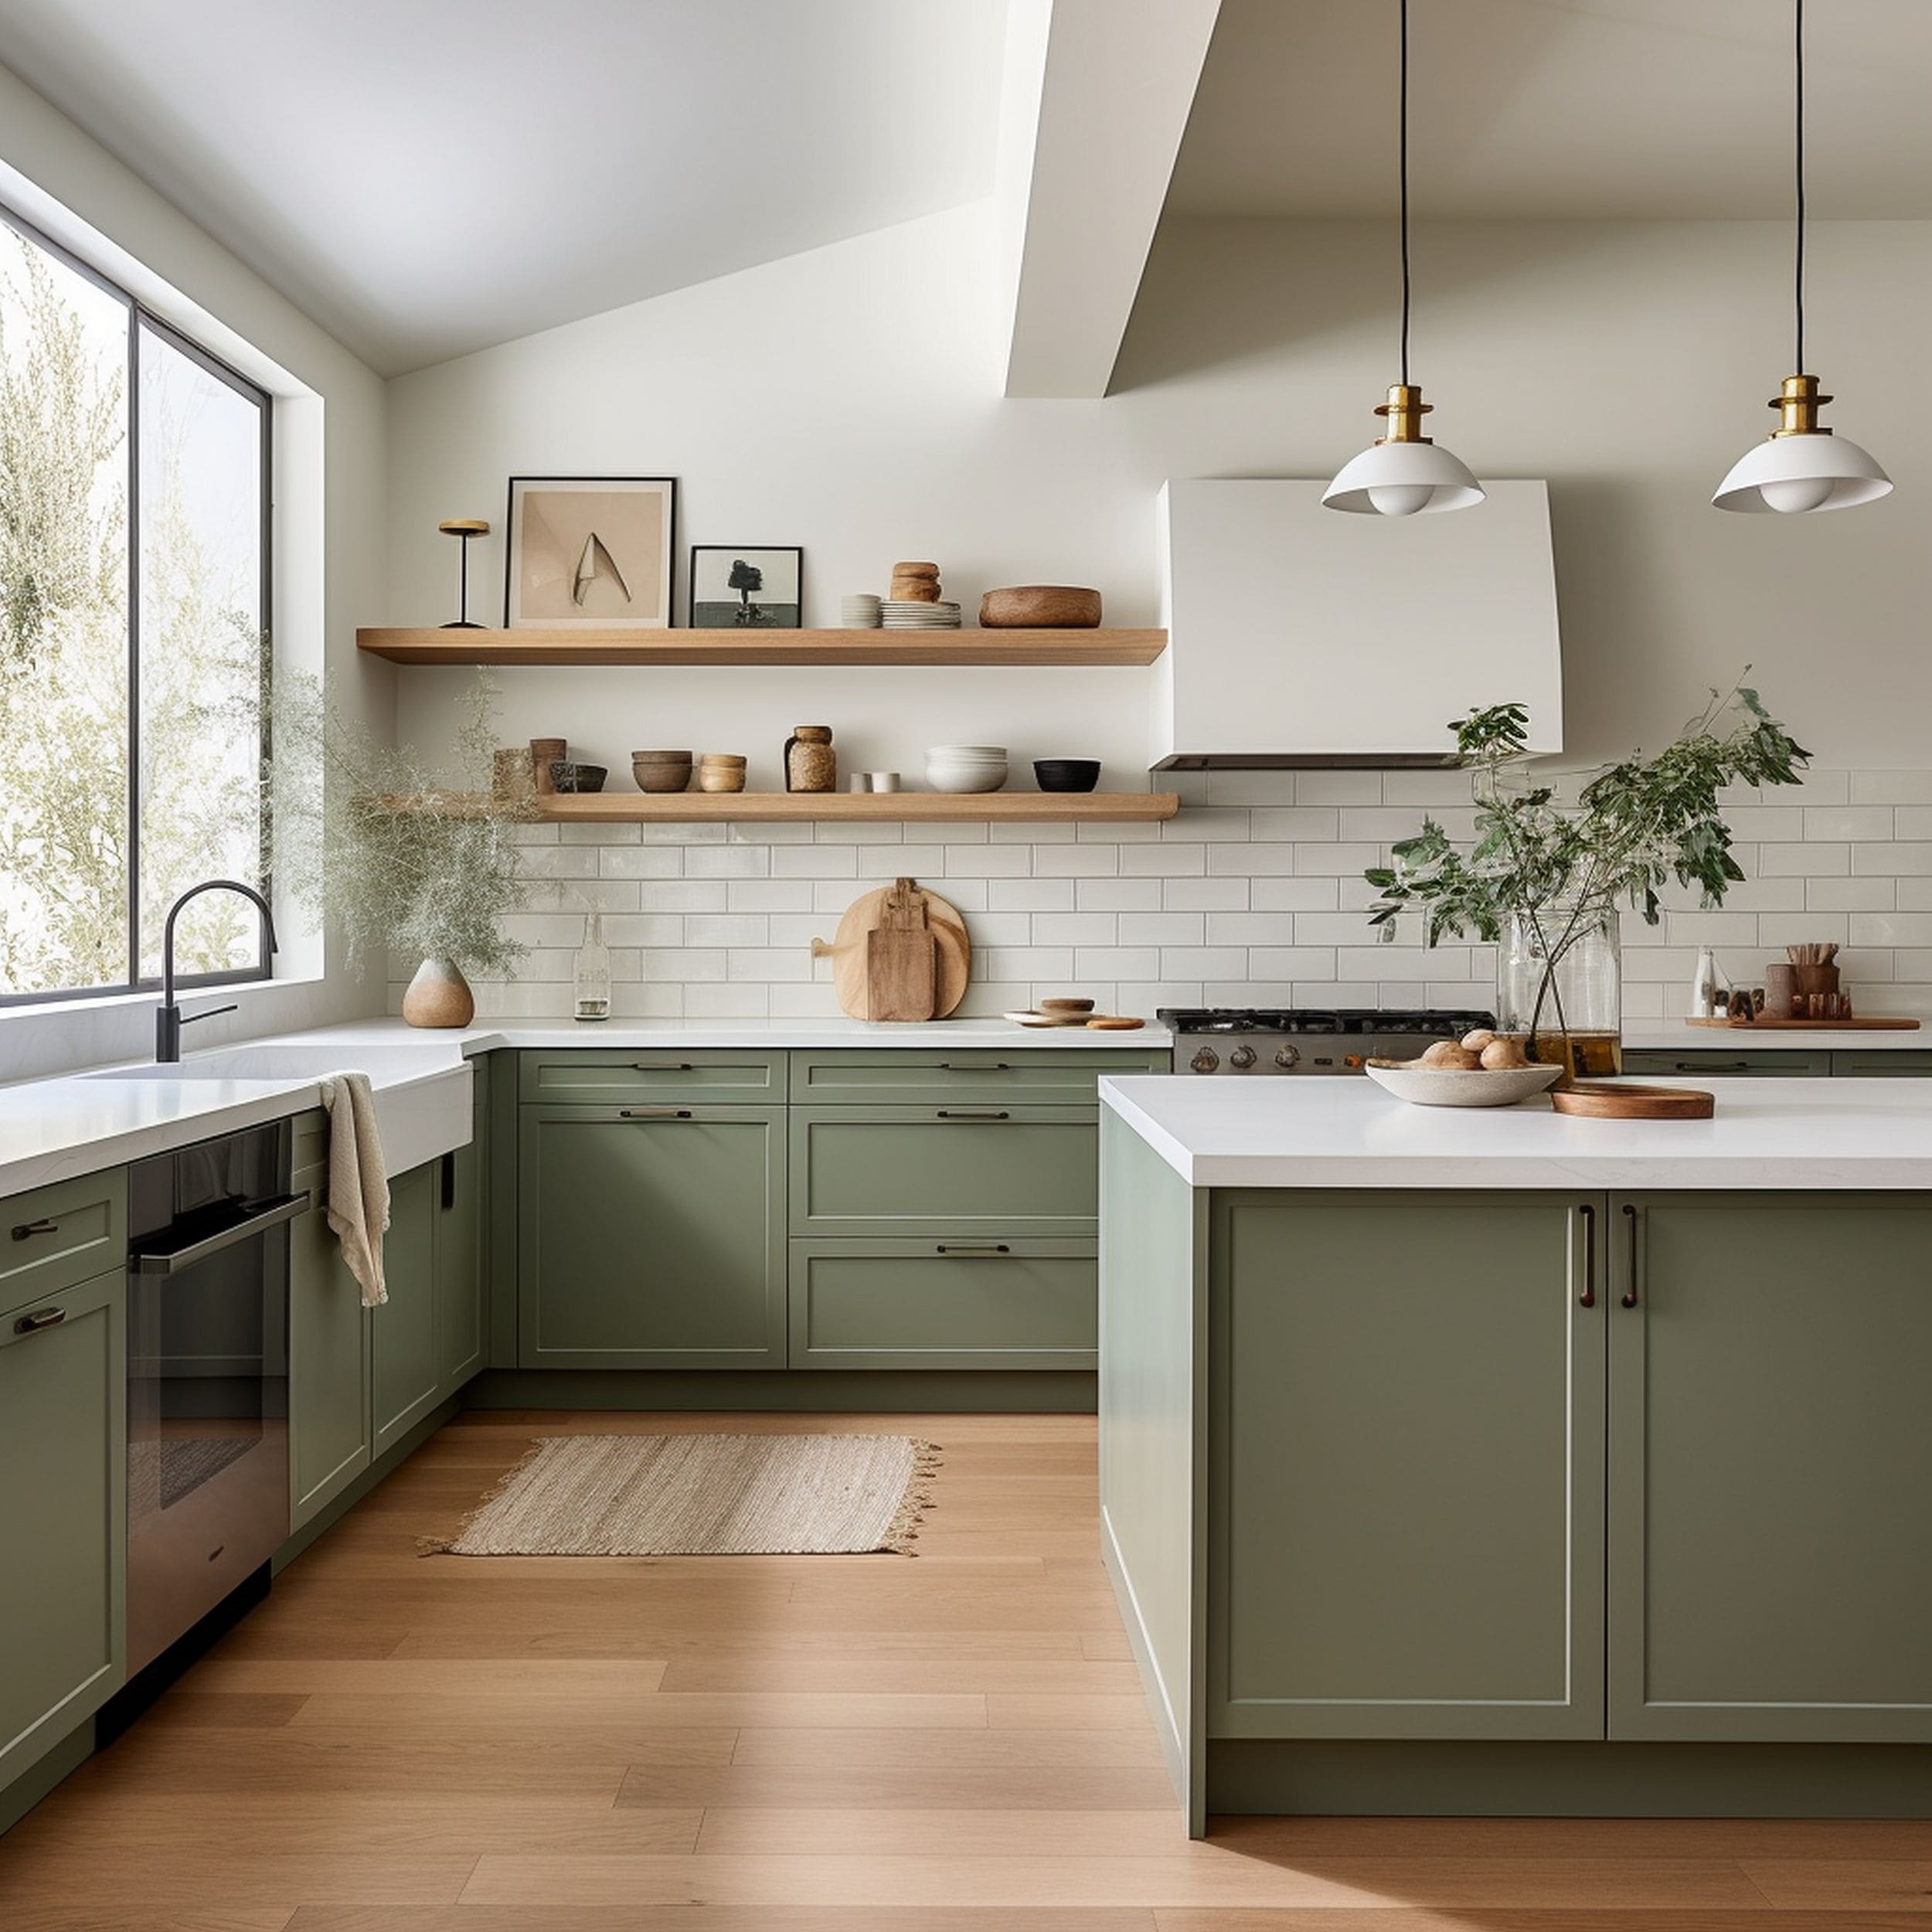 Kitchen With Sage Green Cabinets and White Walls